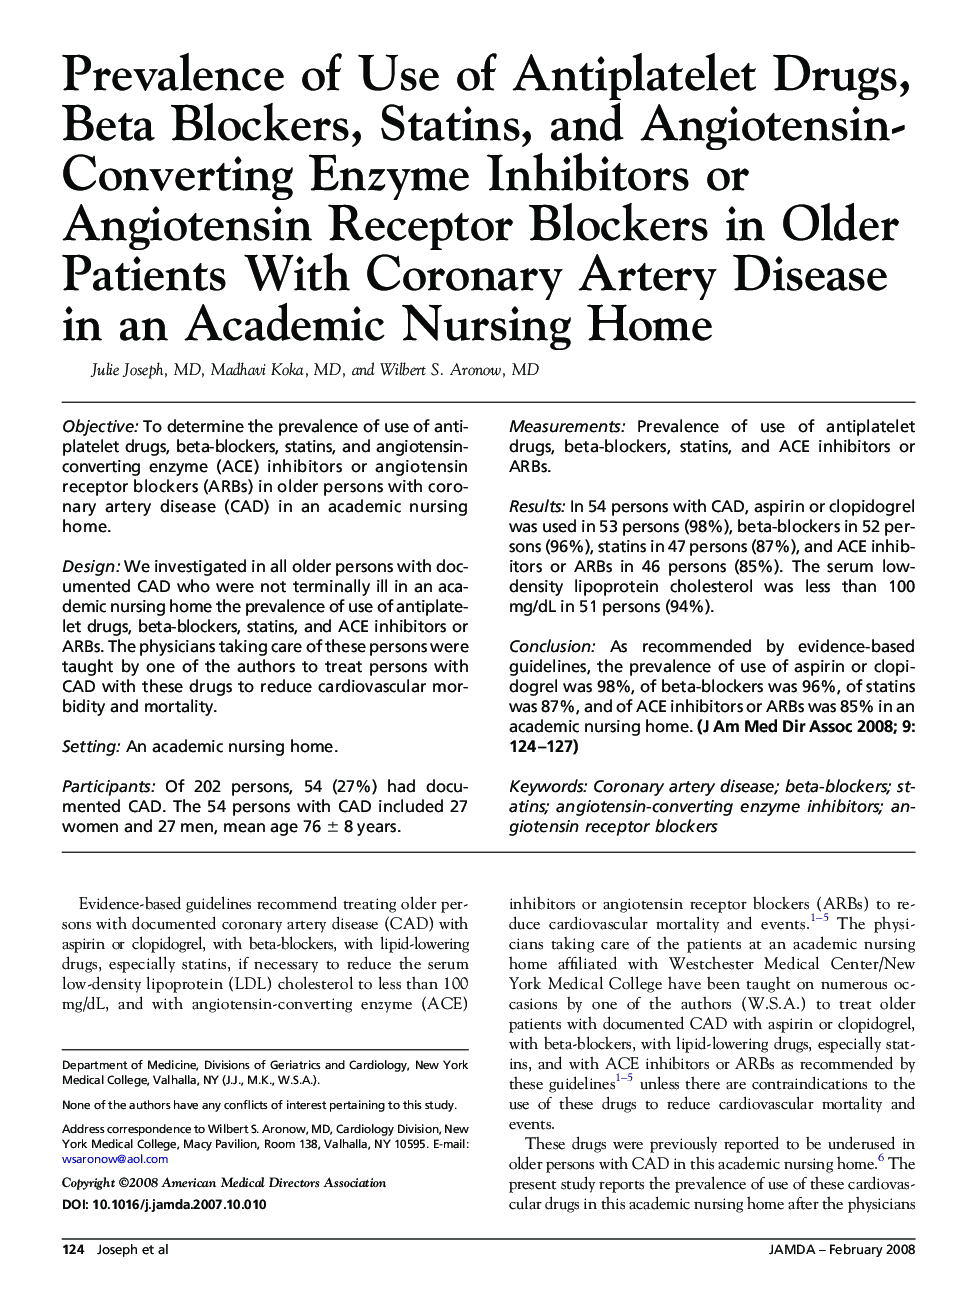 Prevalence of Use of Antiplatelet Drugs, Beta Blockers, Statins, and Angiotensin-Converting Enzyme Inhibitors or Angiotensin Receptor Blockers in Older Patients With Coronary Artery Disease in an Academic Nursing Home